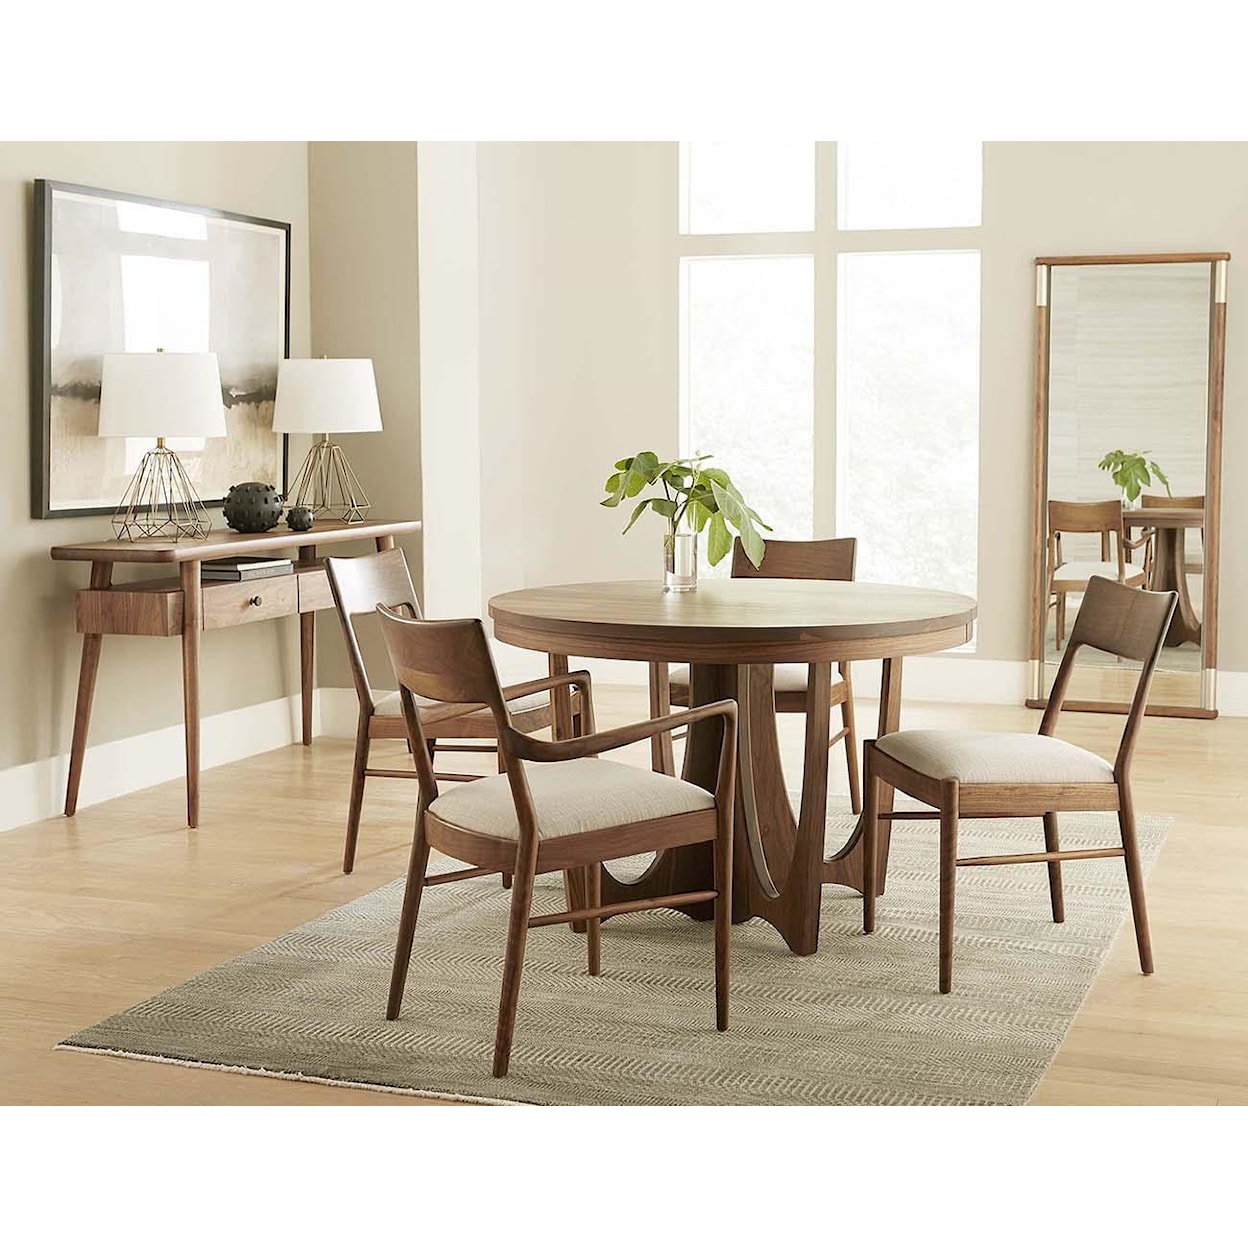 Stickley Walnut Grove 5-PIECE TABLE AND CHAIR SET